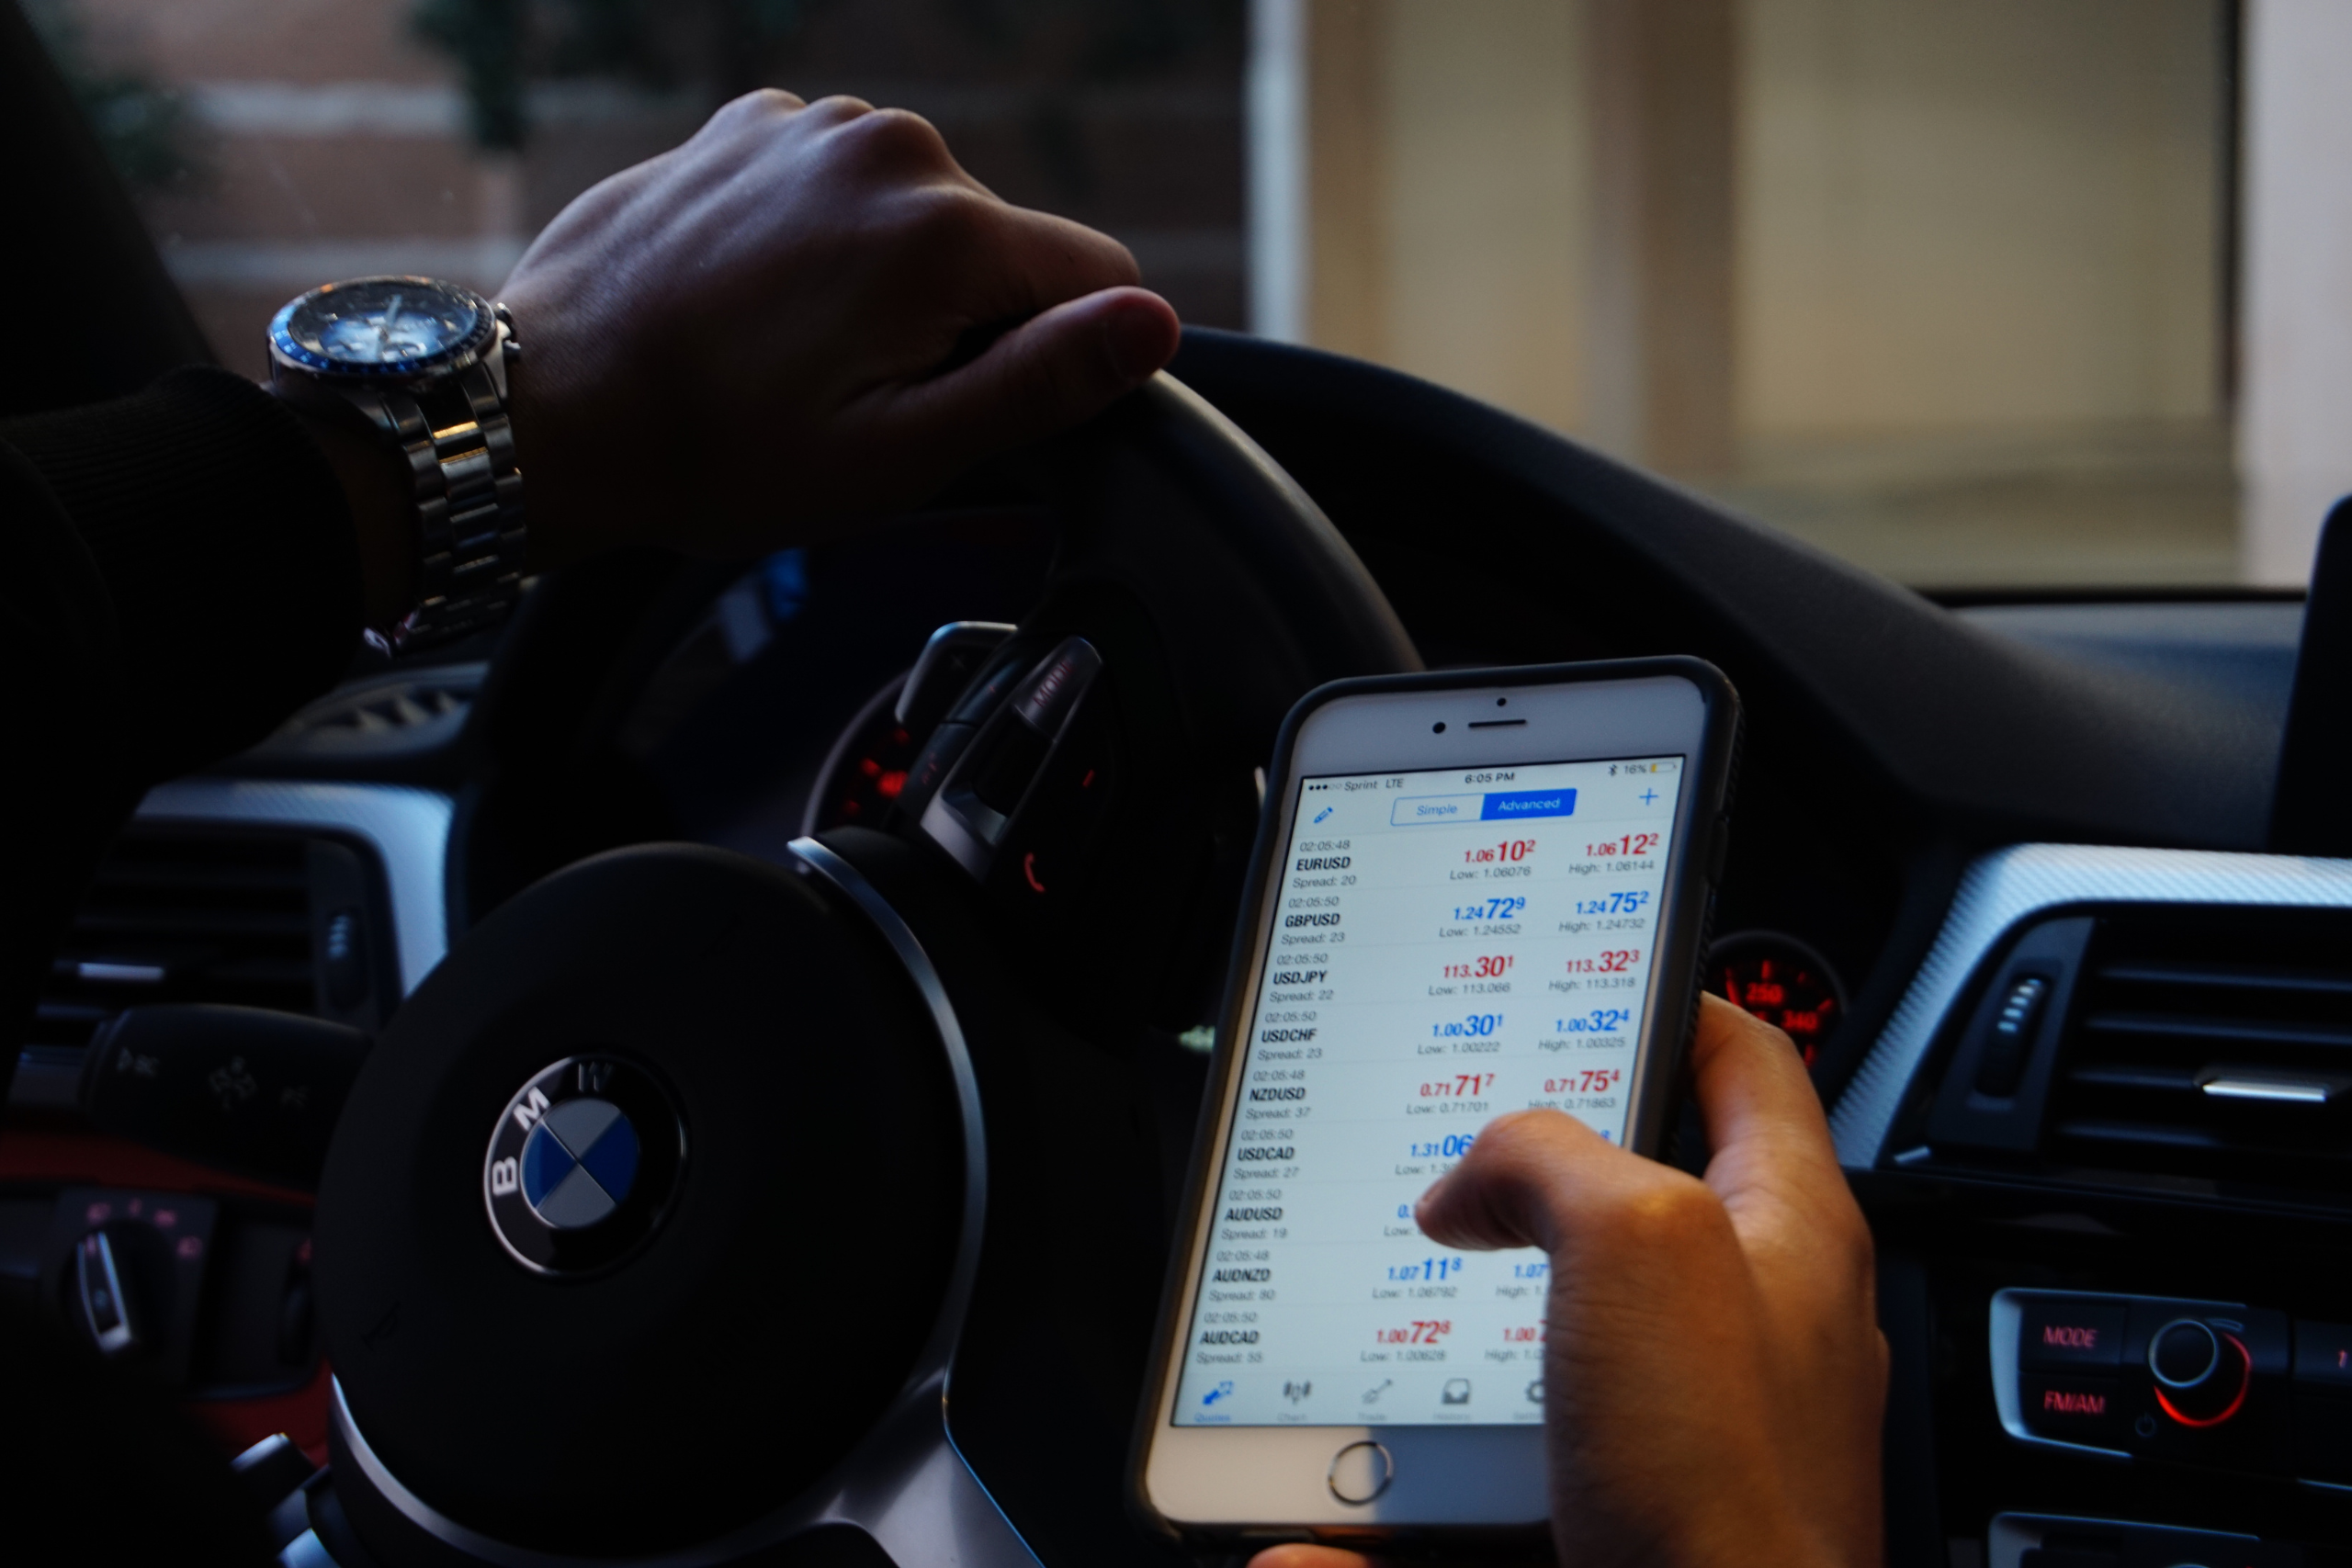 Driver in a BMW vehicle looking at a smartphone with financial information on screen, illustrating potential distracted driving.